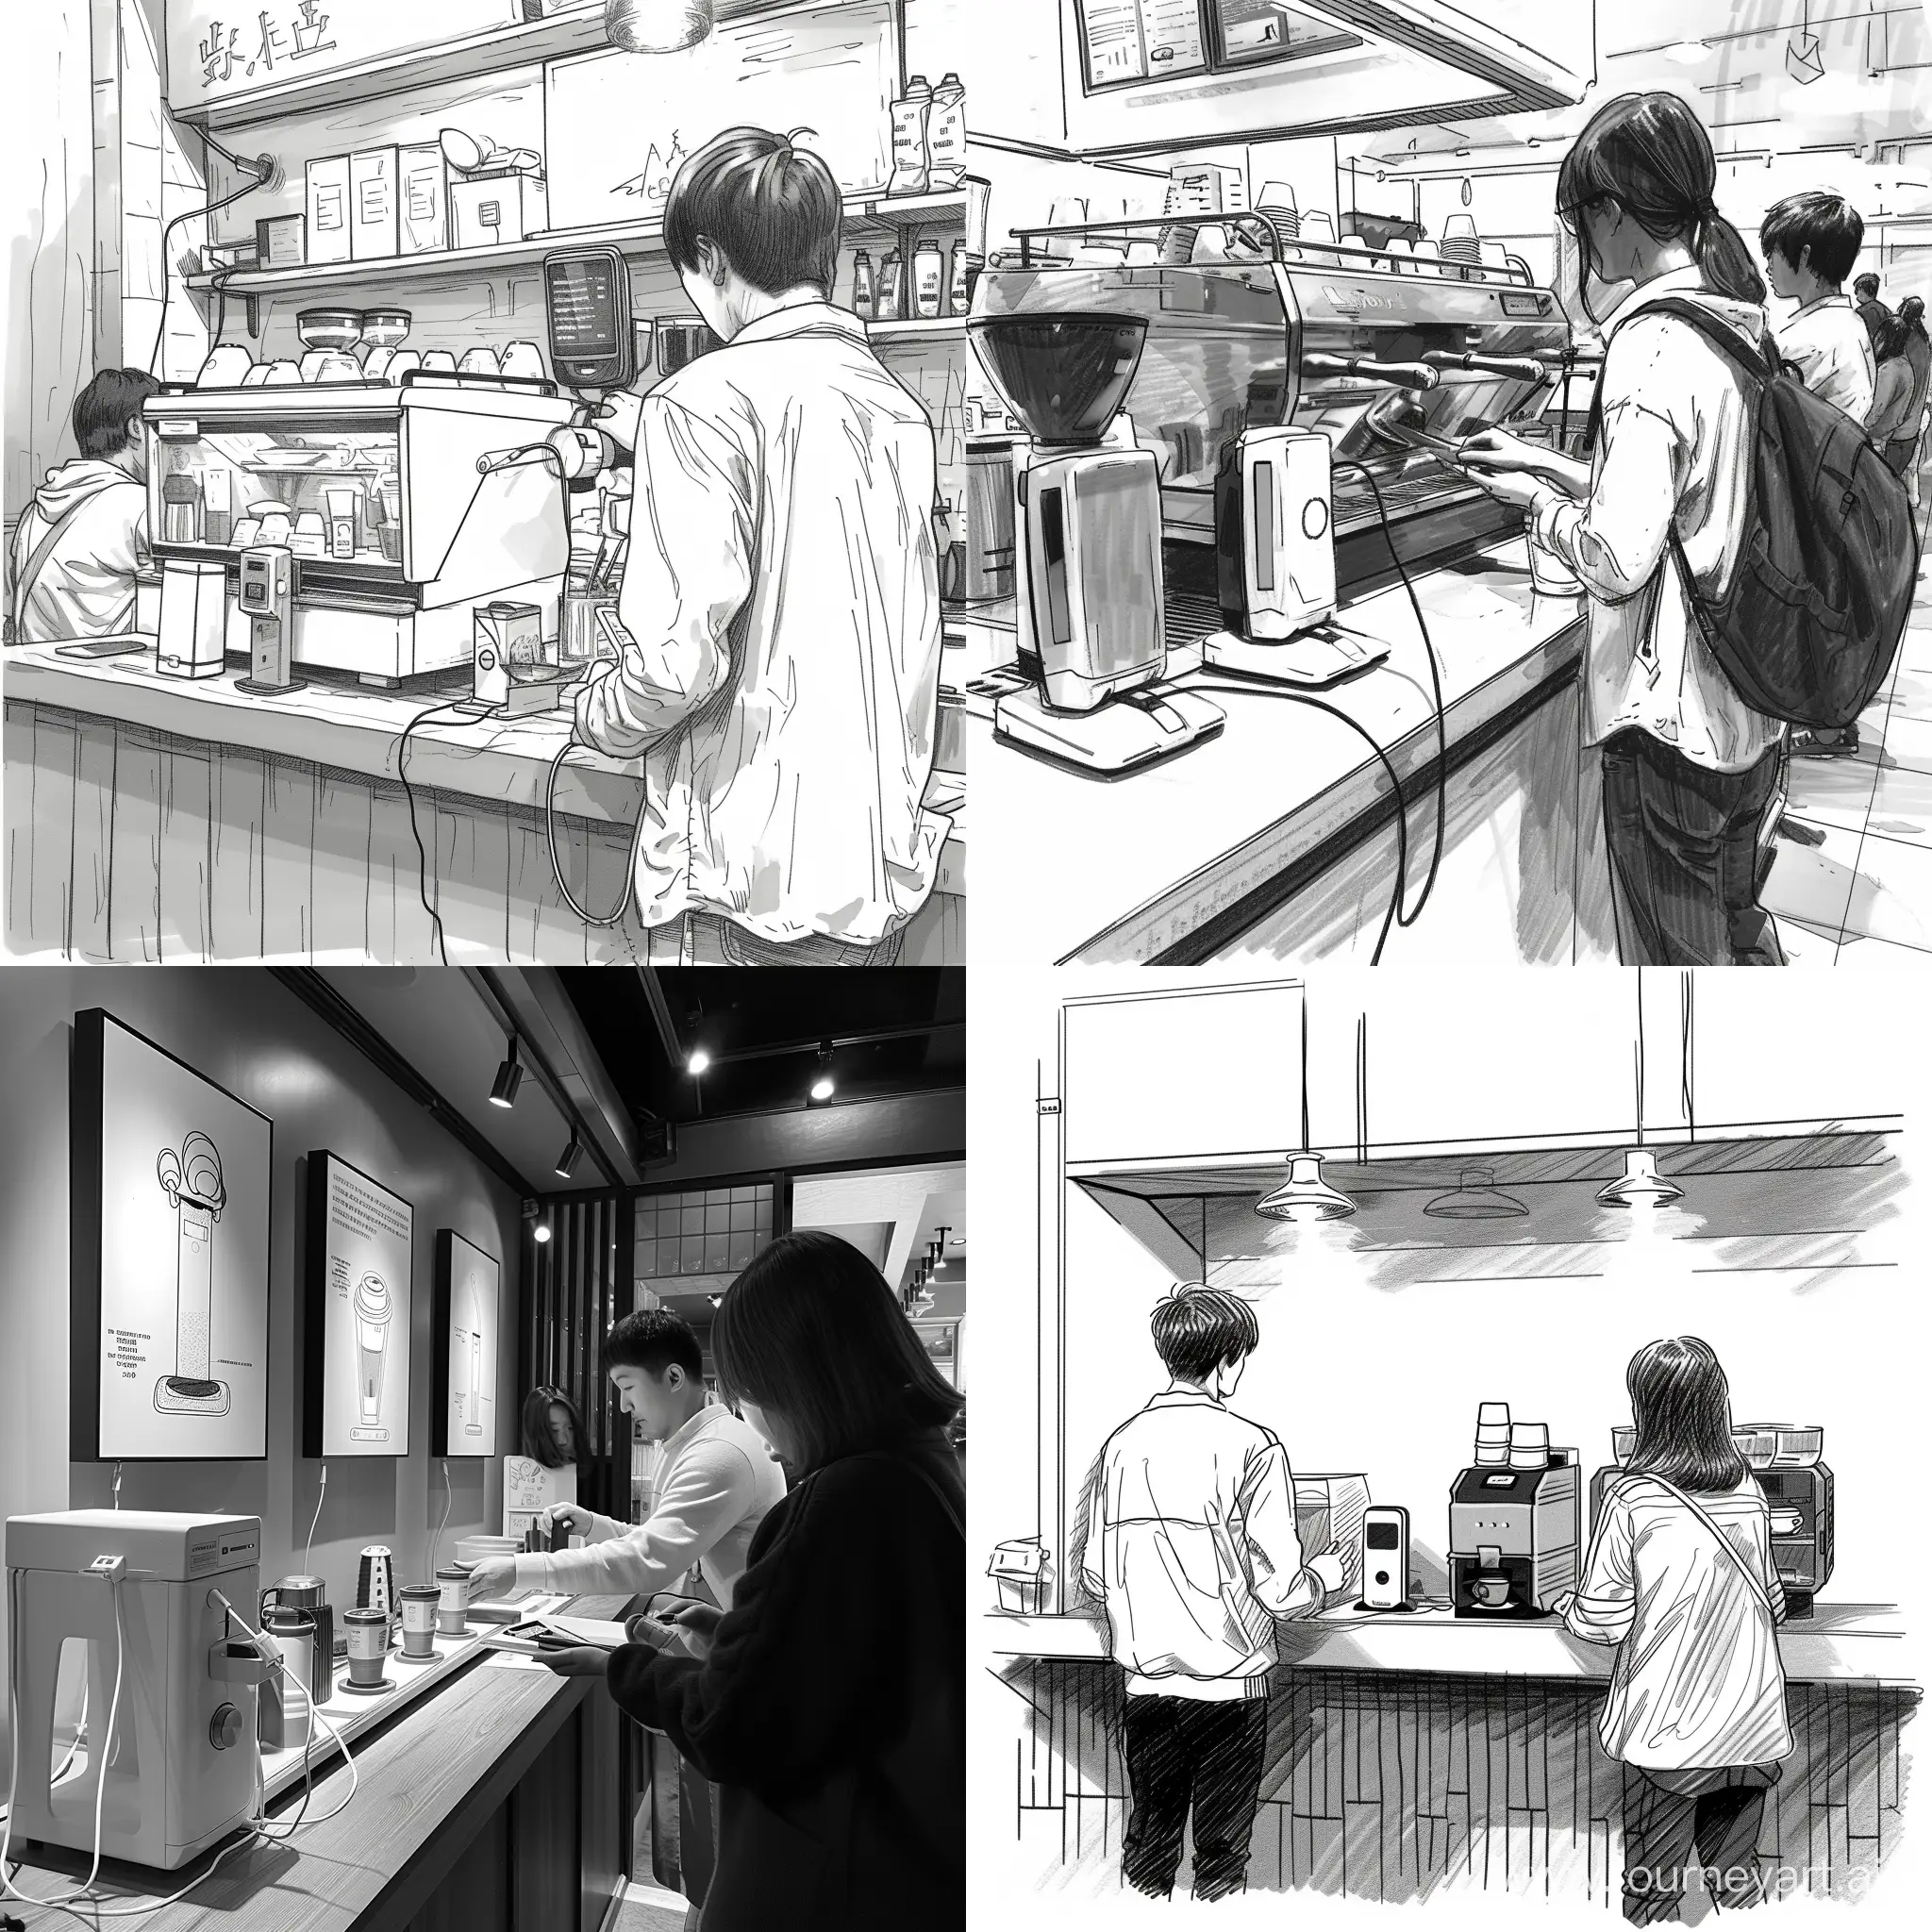 a coffee shop that has powerbank station on the counter and customer try to use it, the image be figure draw and black and white, like drawing with pencil 